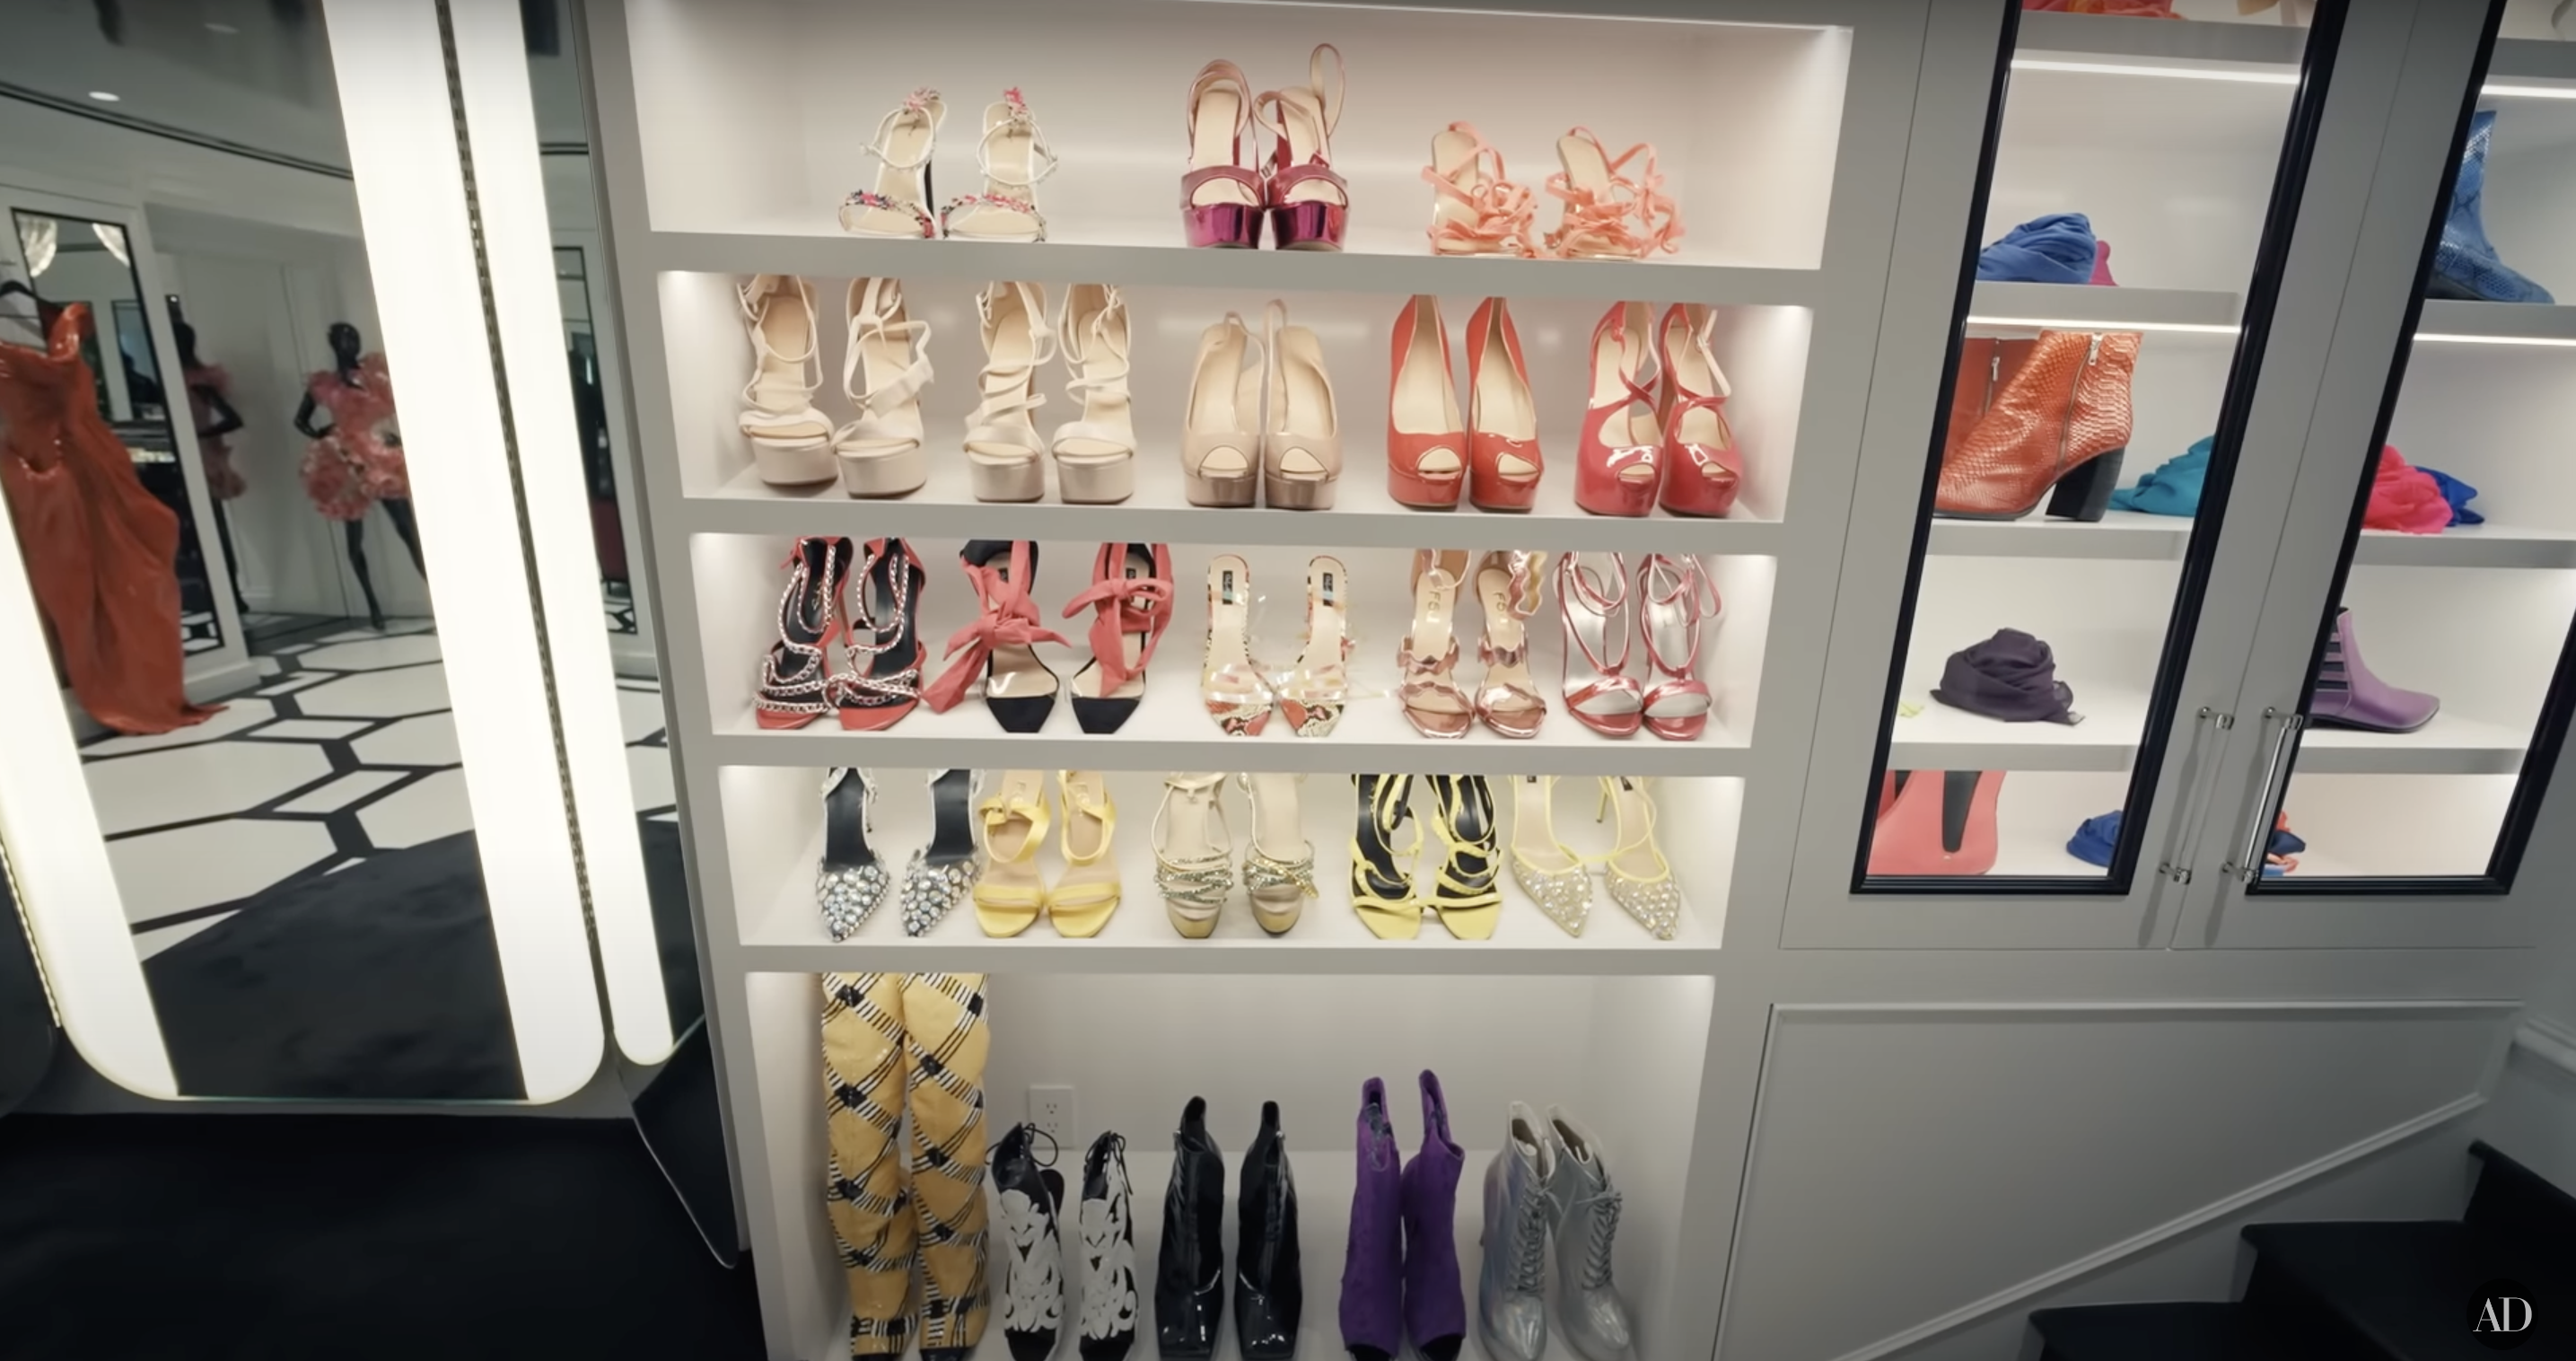 A section of RuPaul's closet in his and Georges LeBar's home in Beverly Hills | Source: https://www.youtube.com/@Archdigest